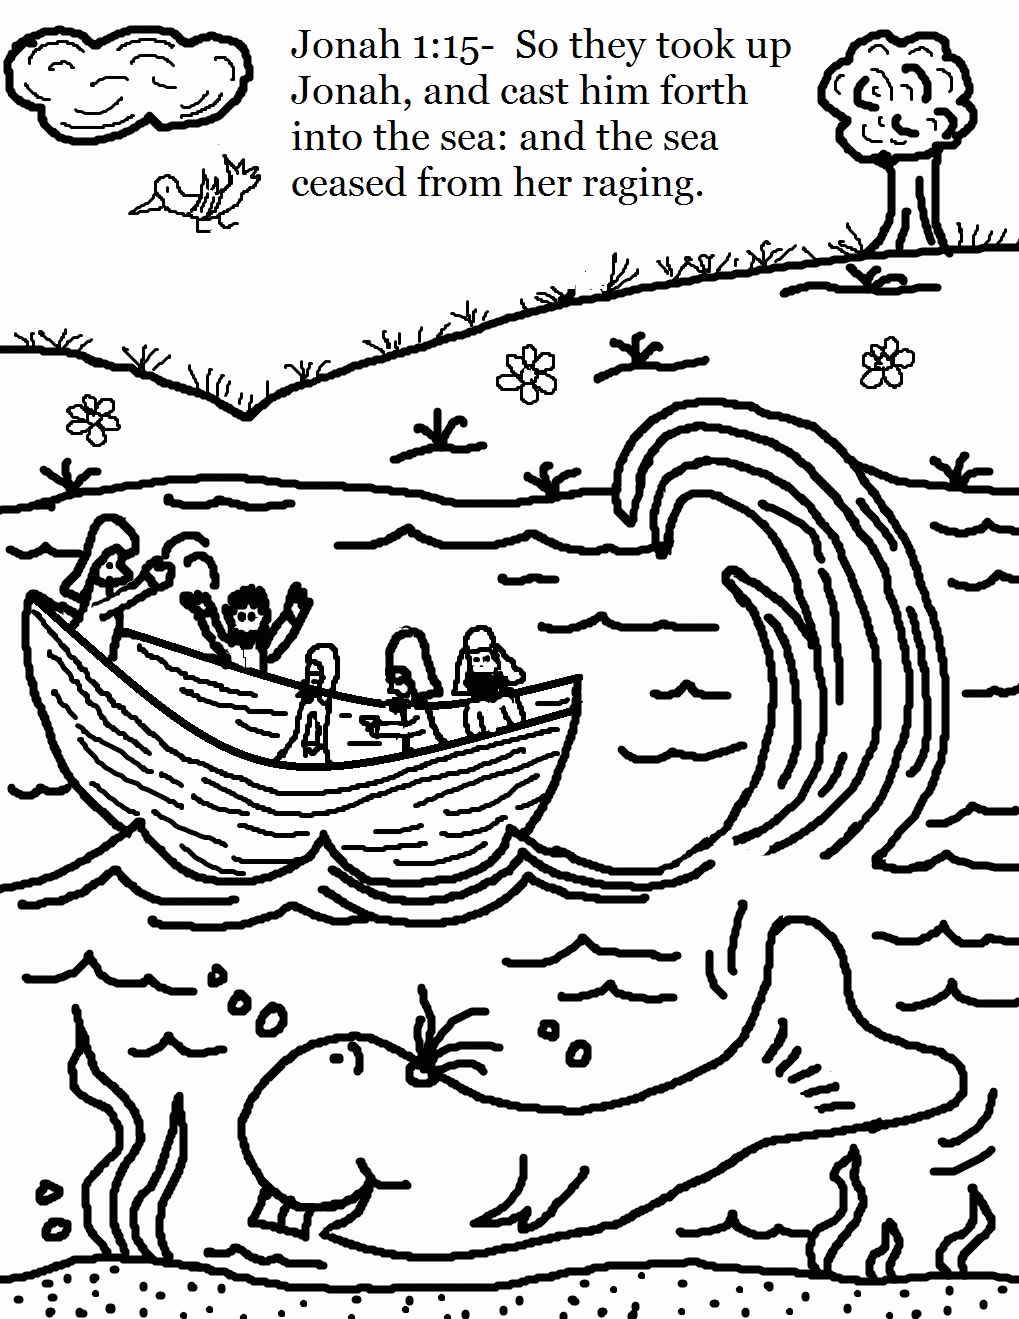 Jonah and the whale coloring pages off